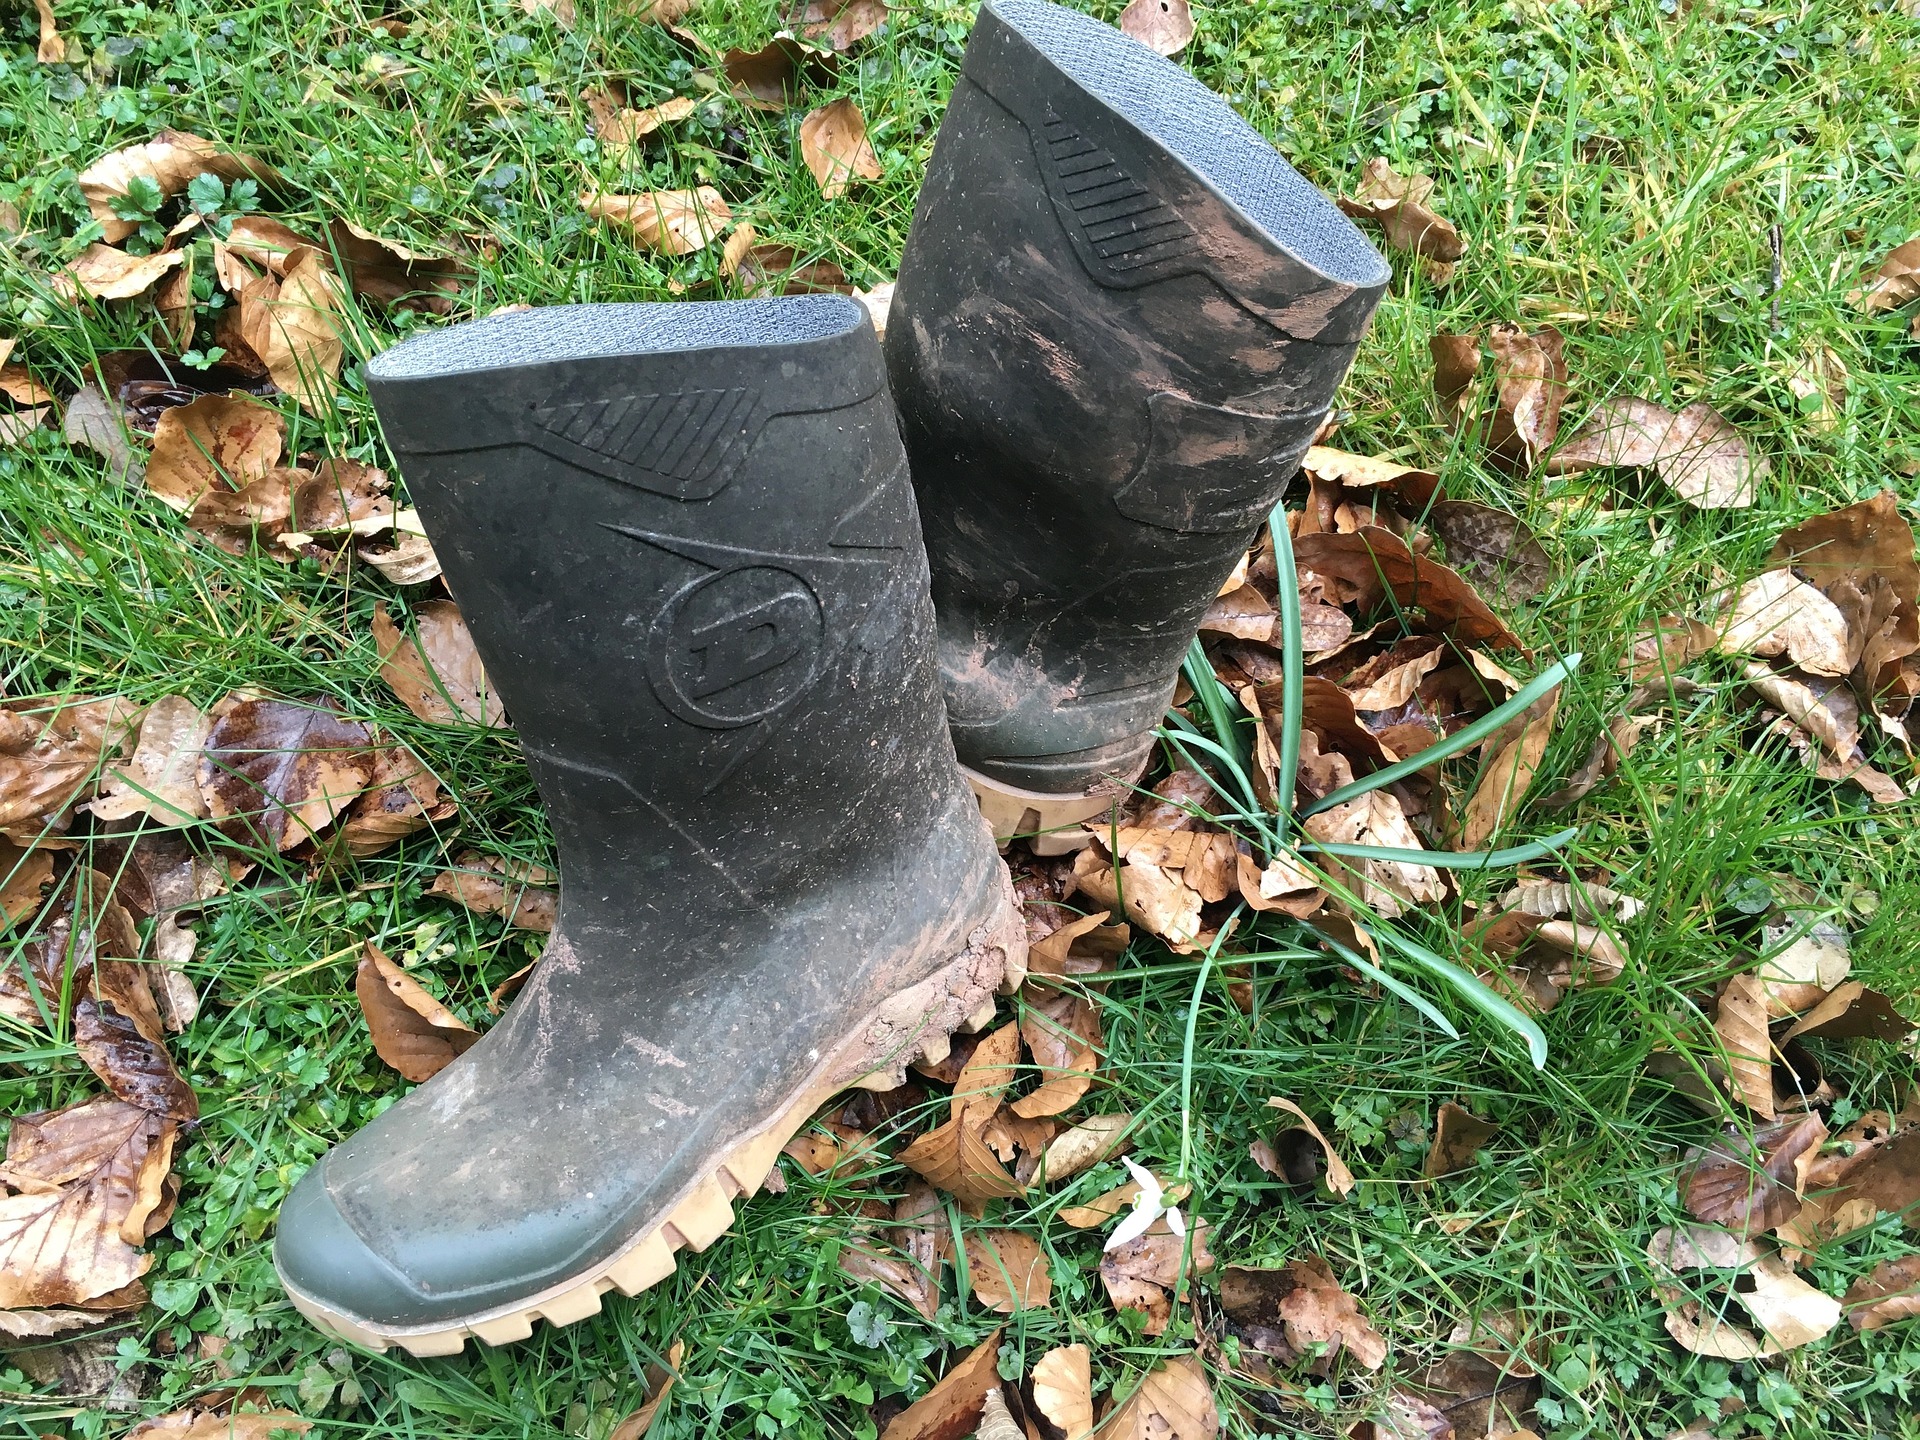 How To Make Hunting Boots Scent-Free